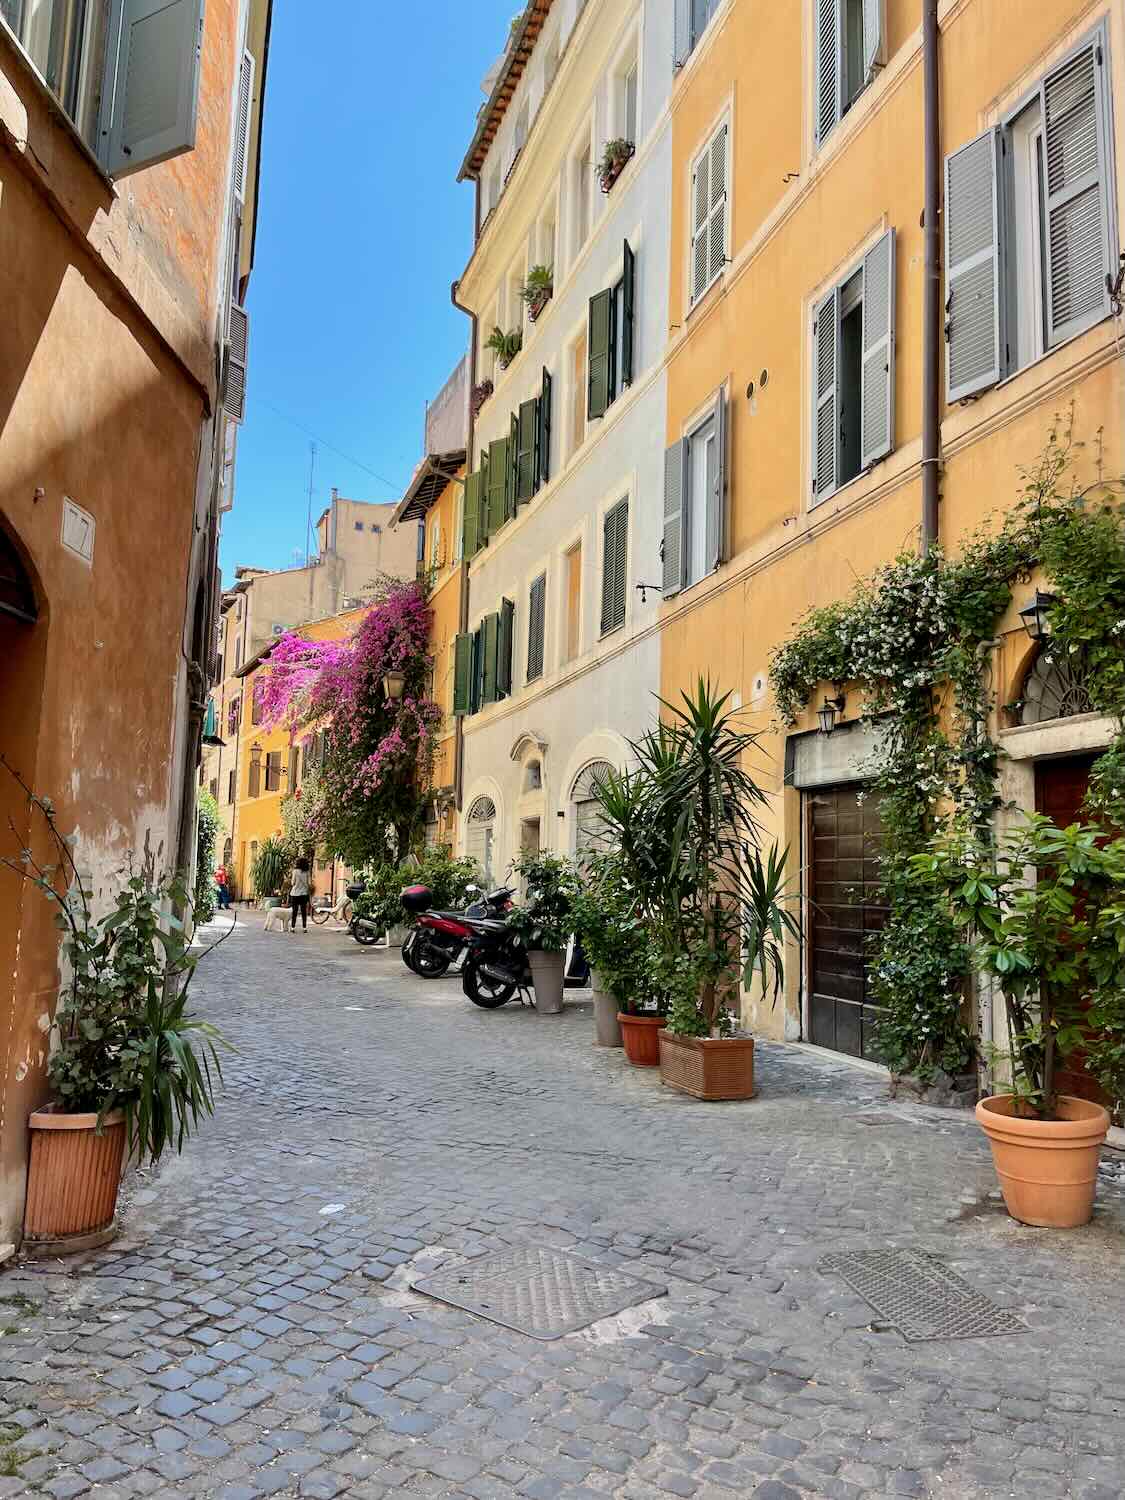 A charming street in Rome lined with colorful buildings featuring shutters and potted plants. The cobblestone street is adorned with lush greenery and blooming flowers, and a few motorcycles are parked along the side.